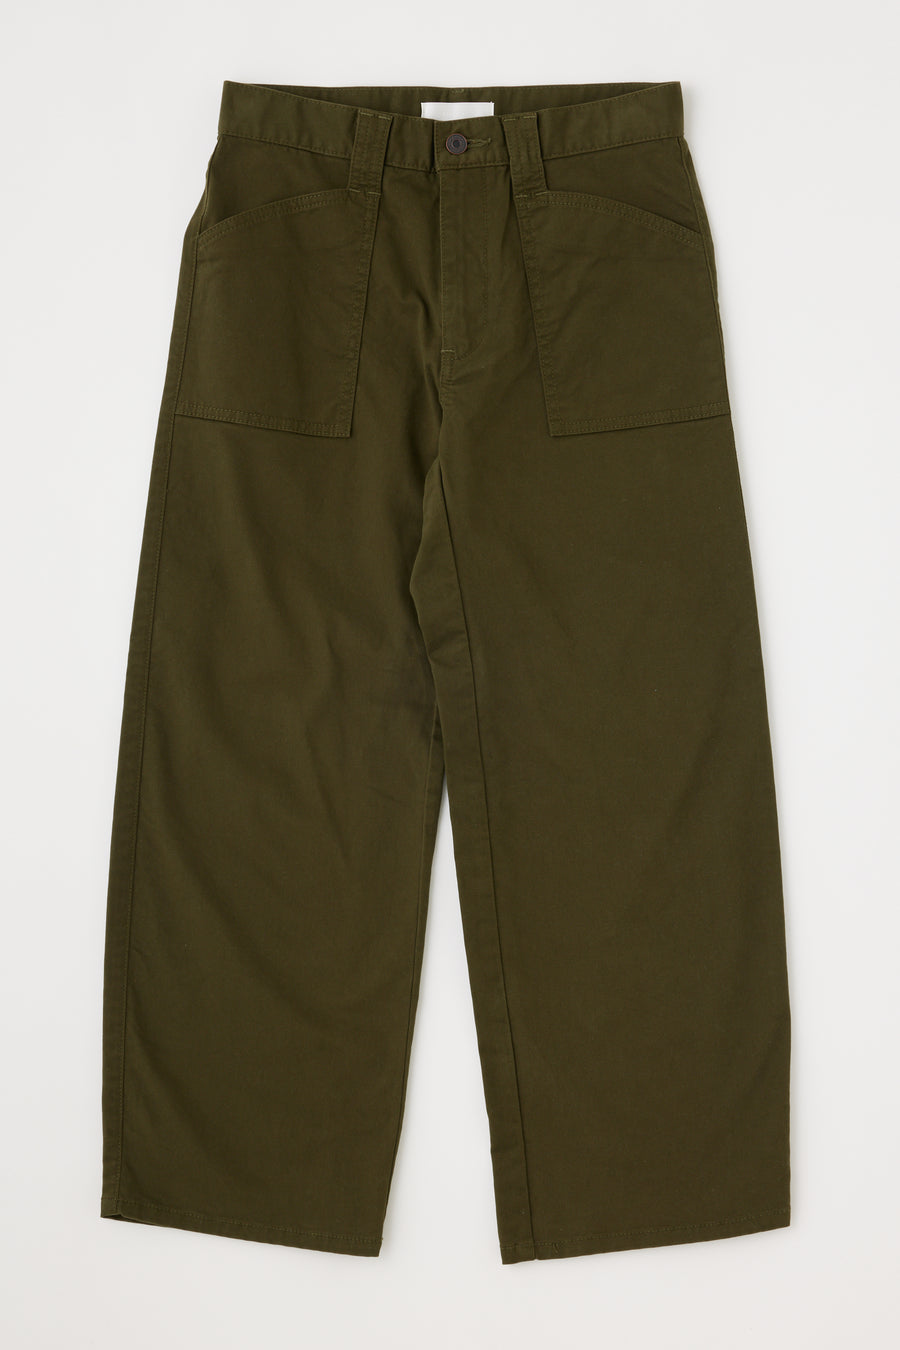 Moussy Vintage Harpeth Gusset Cargo Pants